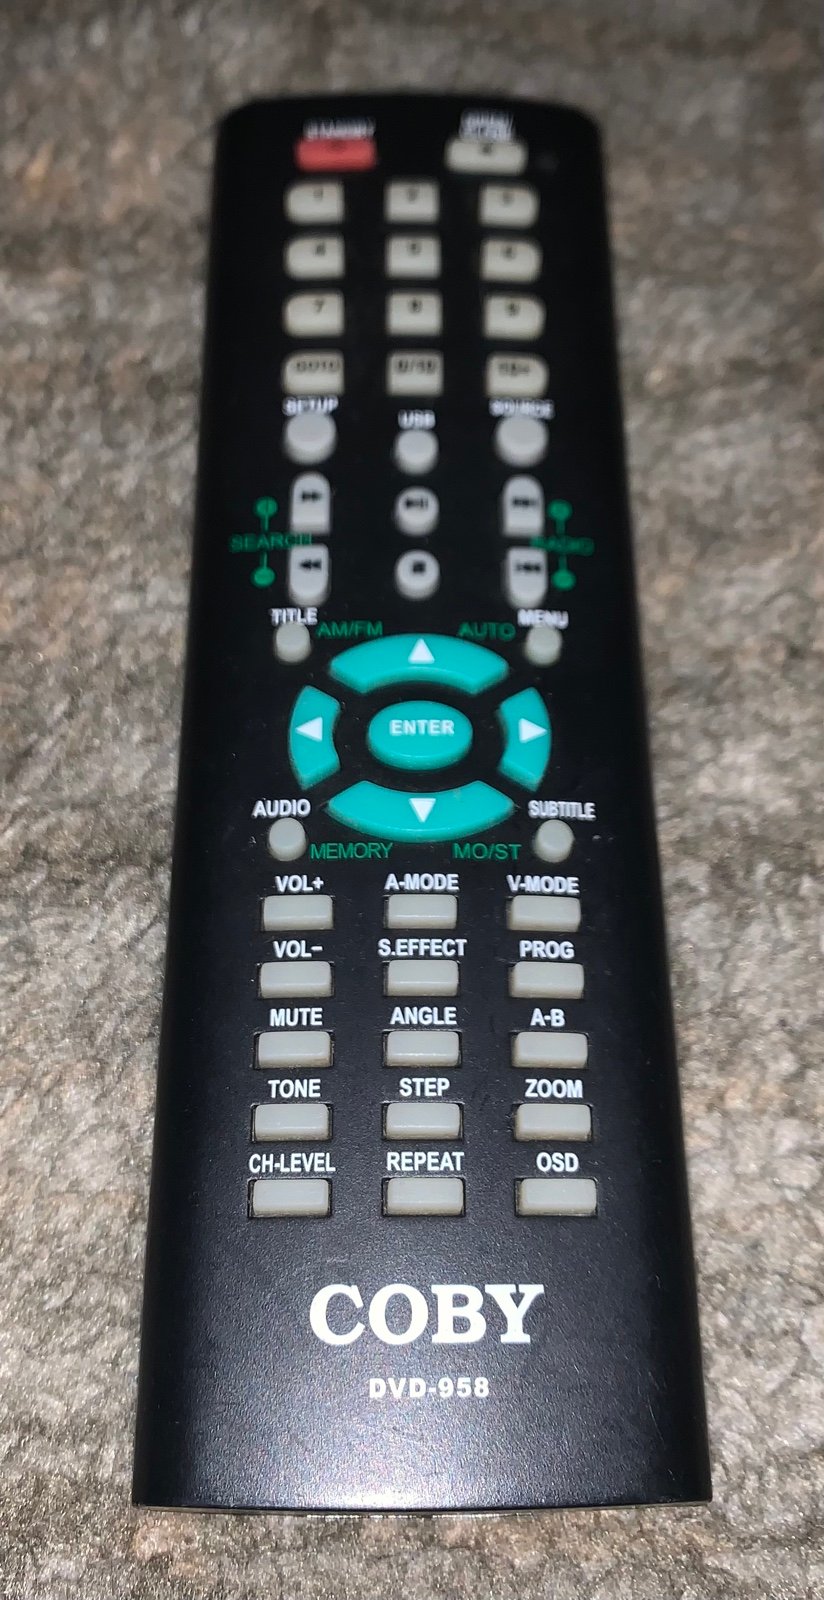 COBY REMOTE CONTROL MODEL DVD-958, PRE-OWNED, IN EXCELLENT CONDITION 7BKTReTz6